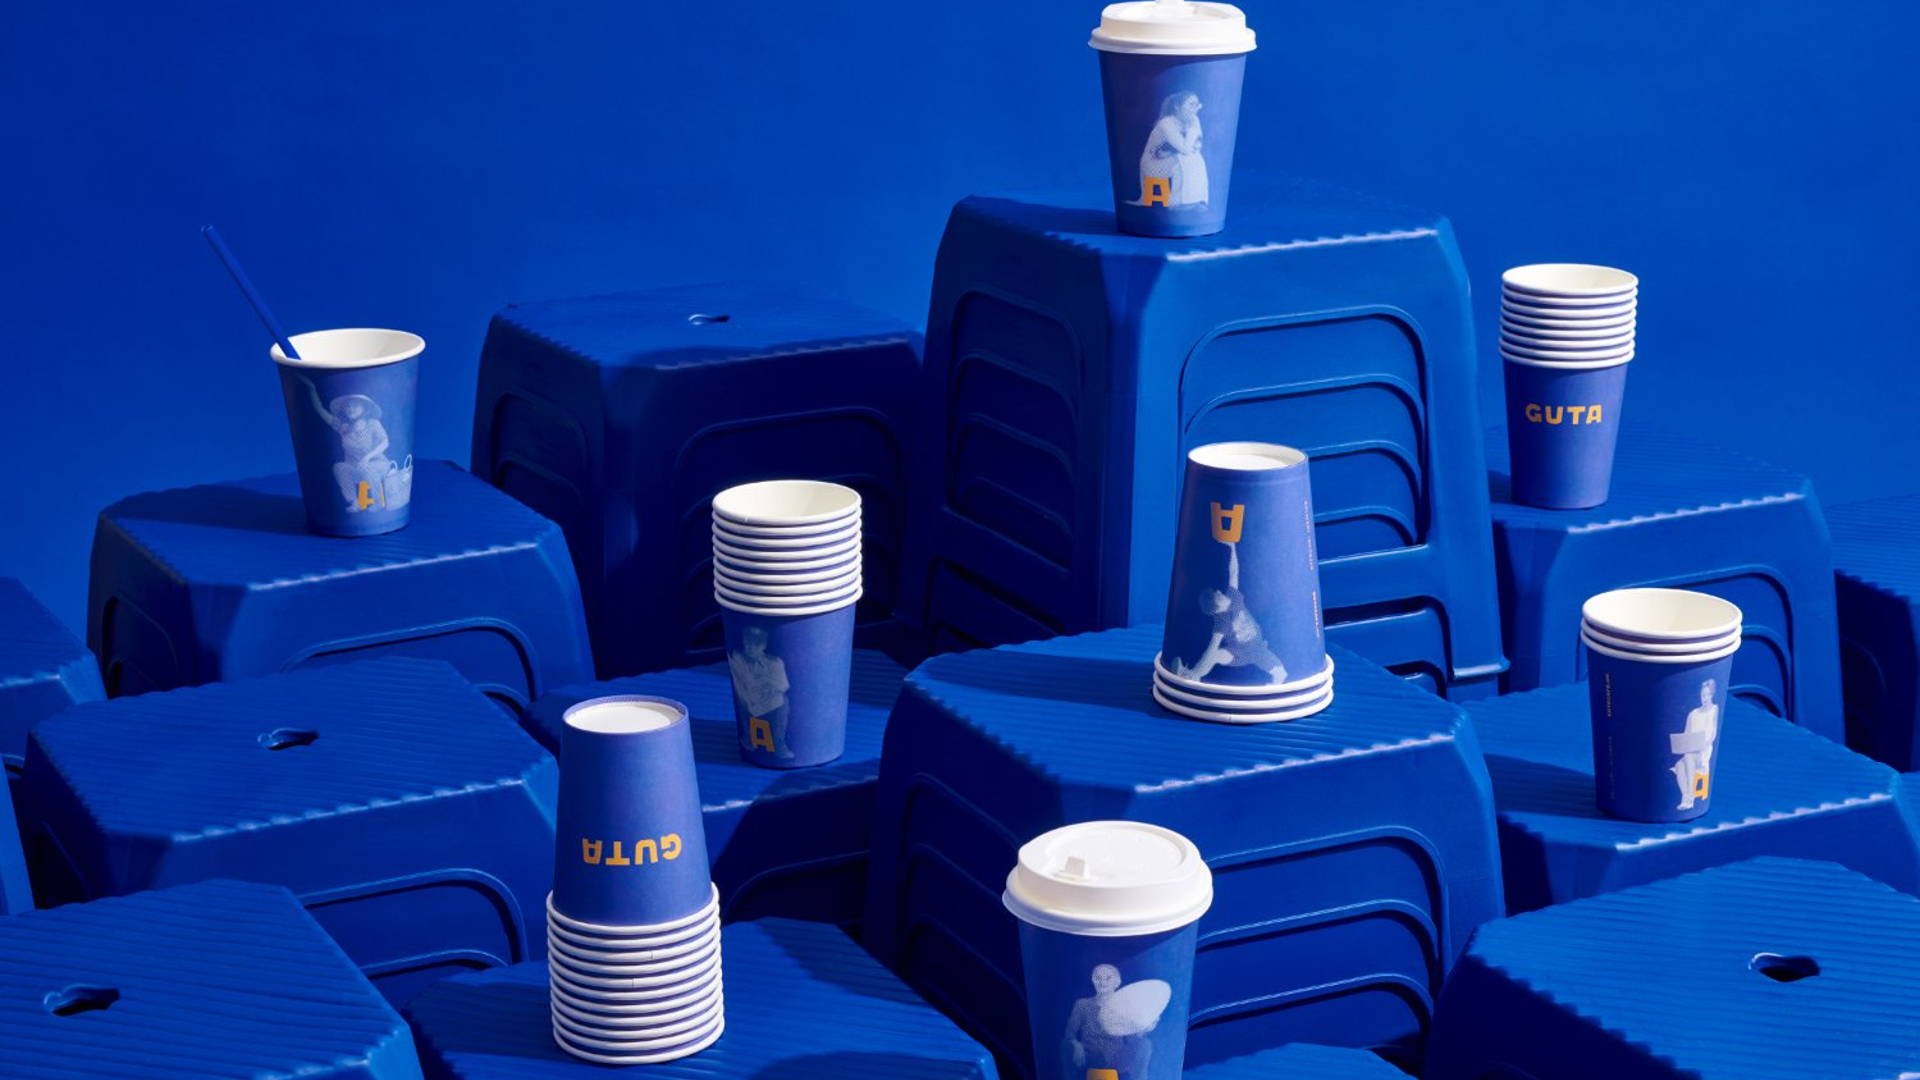 Featured image for This Vietnamese Coffee Chain Branding Found Inspiration In Plastic Stools